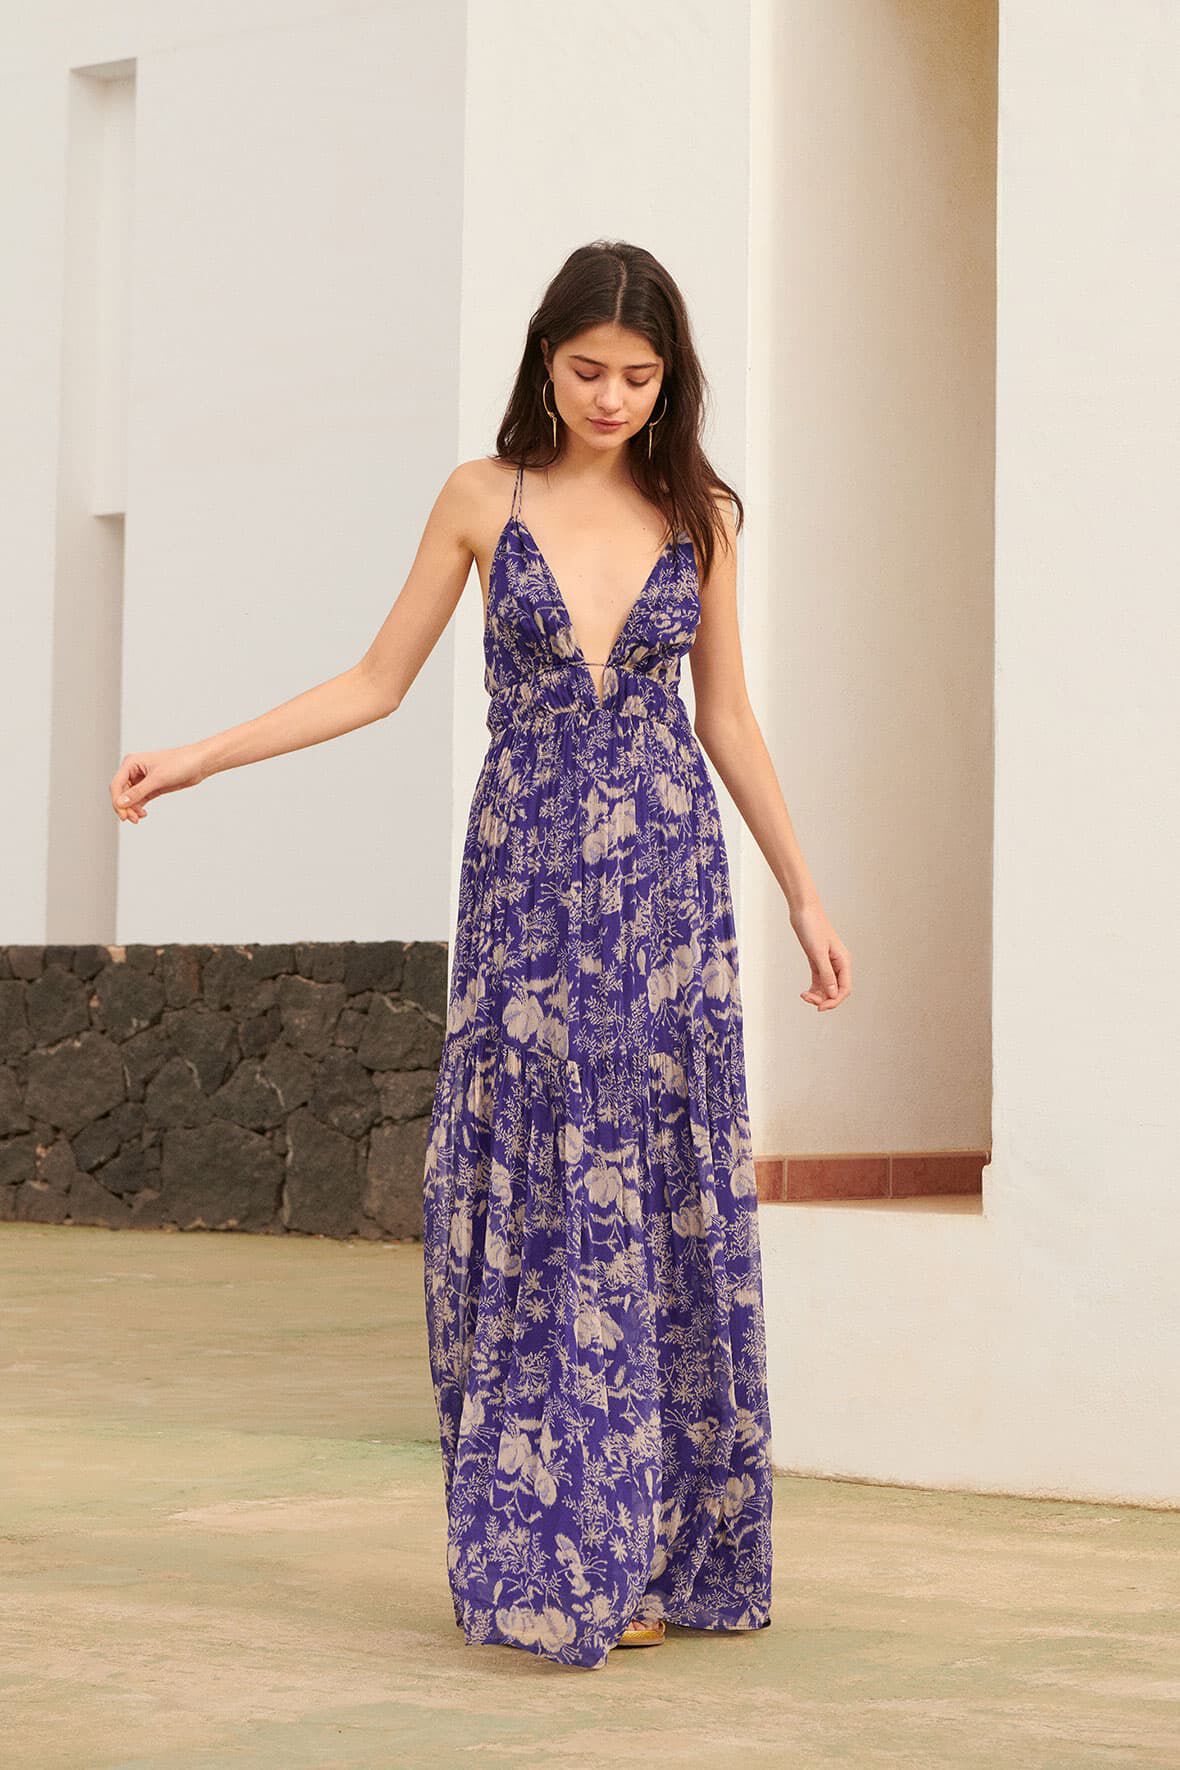 Colorful Summer Wedding Guest Dresses